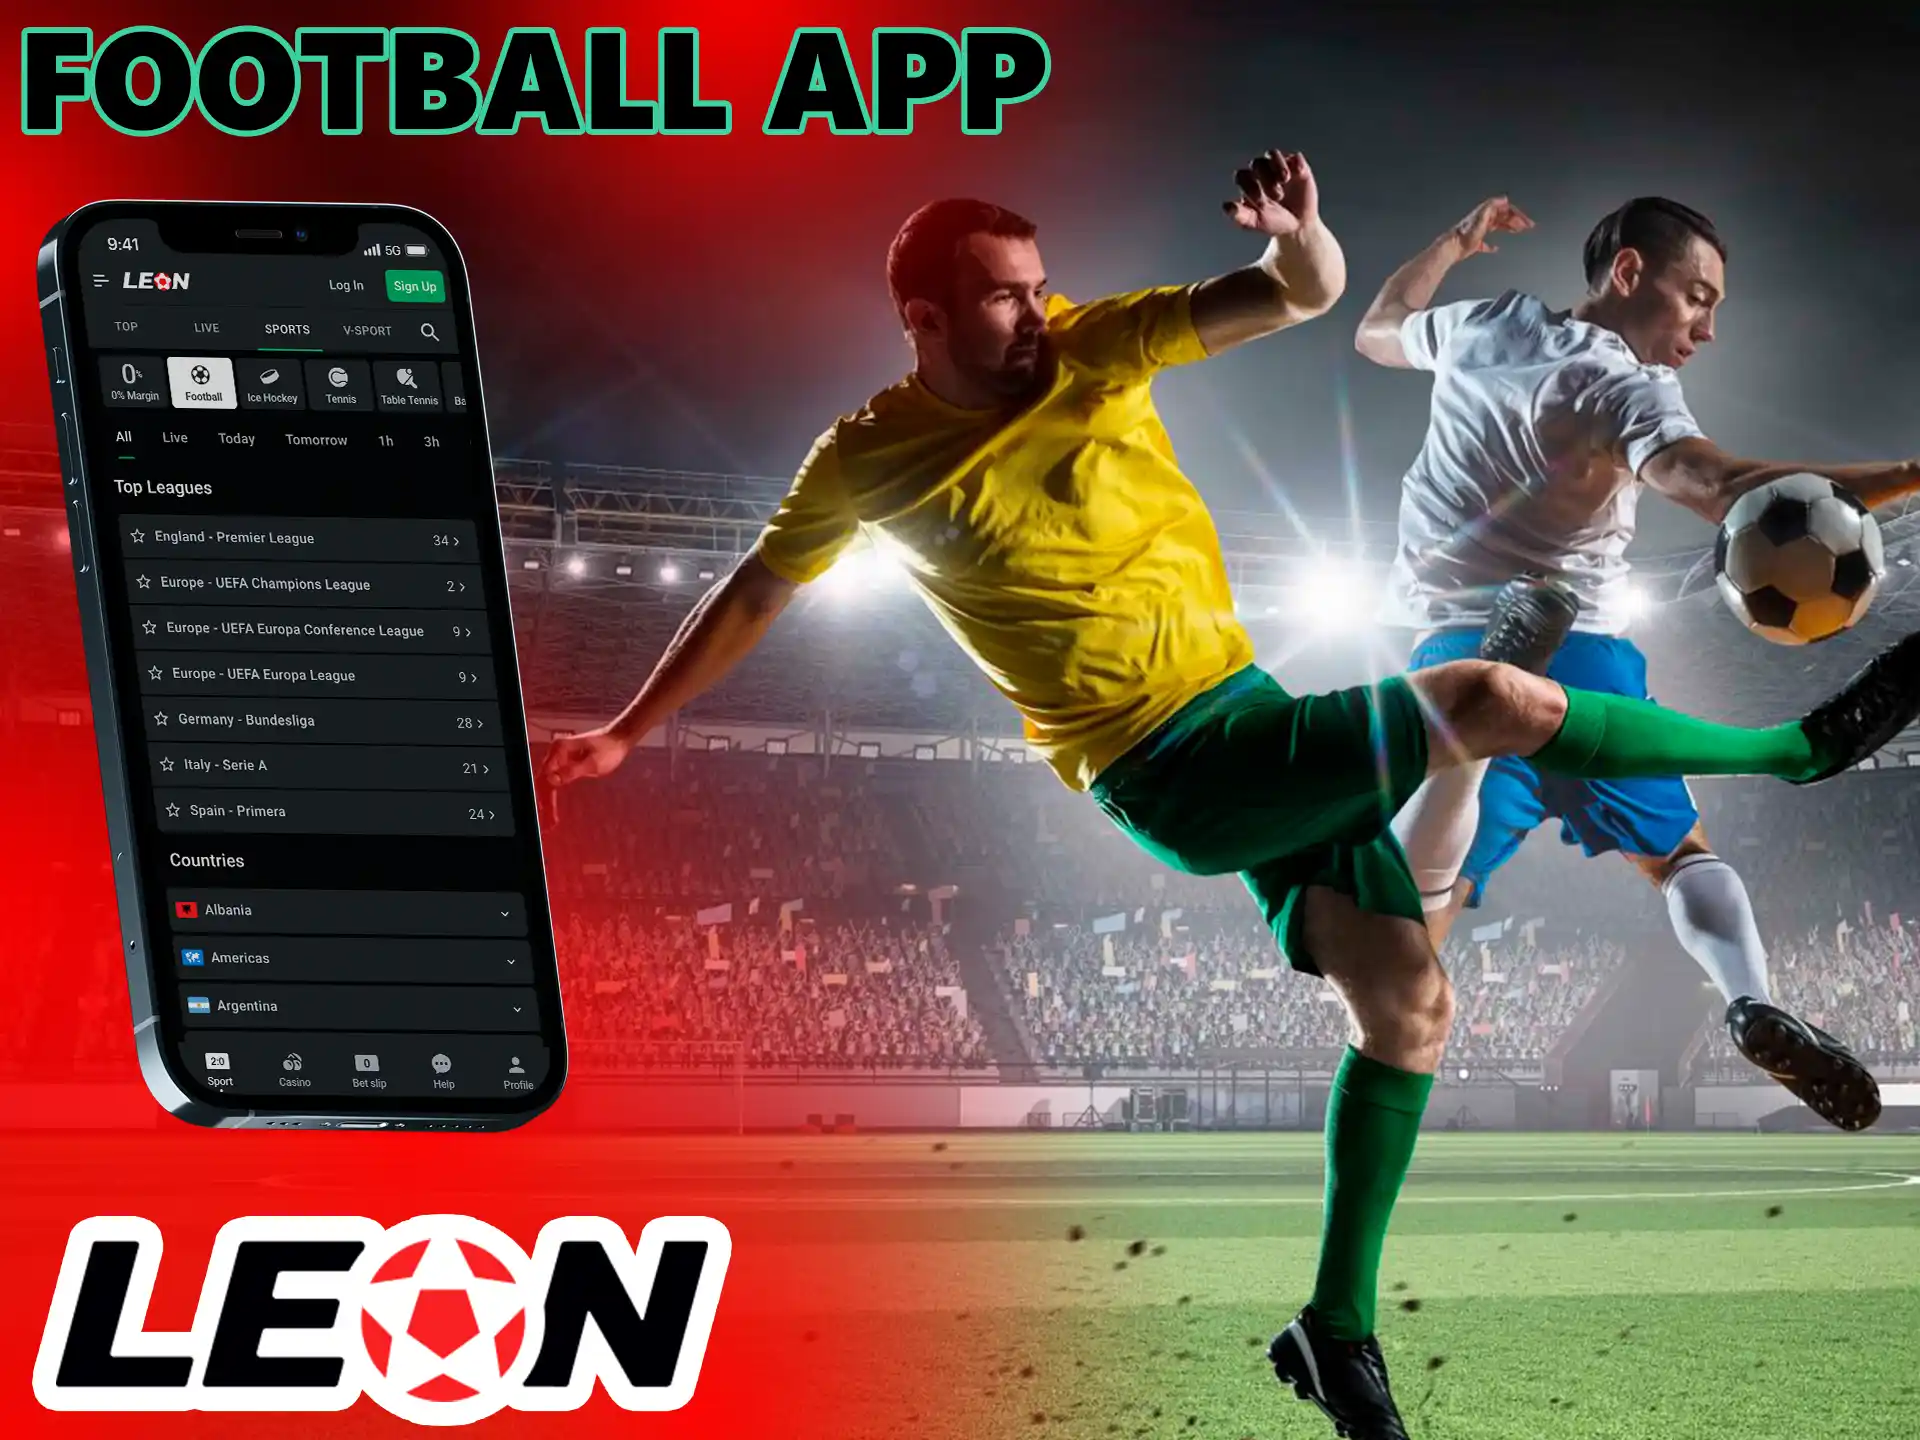 This discipline has many fans around the world and has not been ignored in the Leon Bet app, there is a huge number of matches.